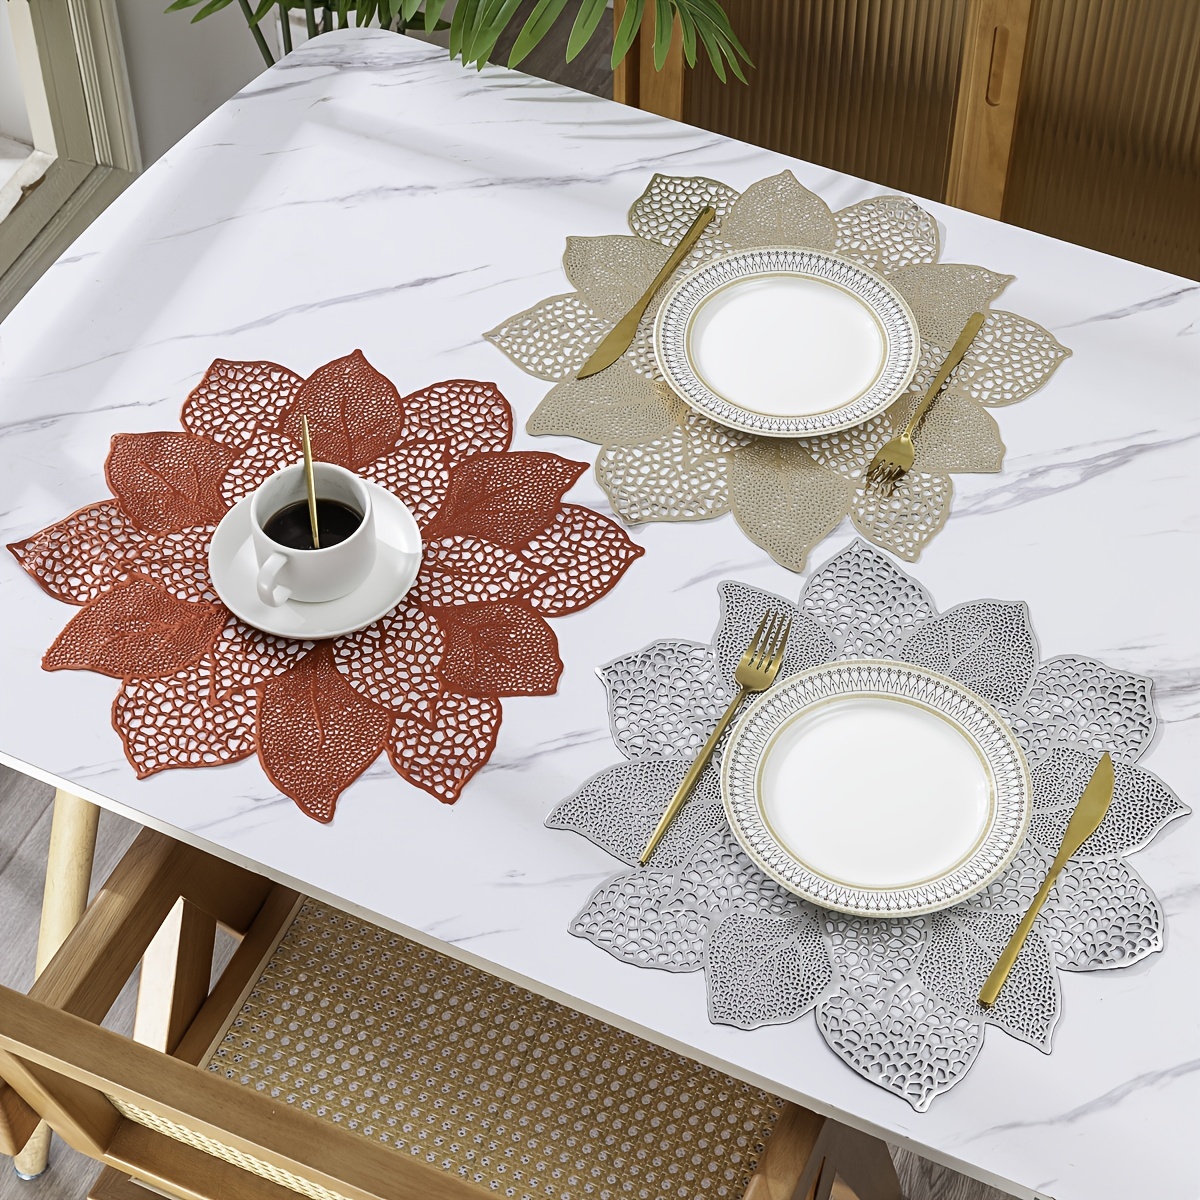 4 Pcs Round Jacquard Weaved Non Slip Placemats Dining Table Place Mats Set